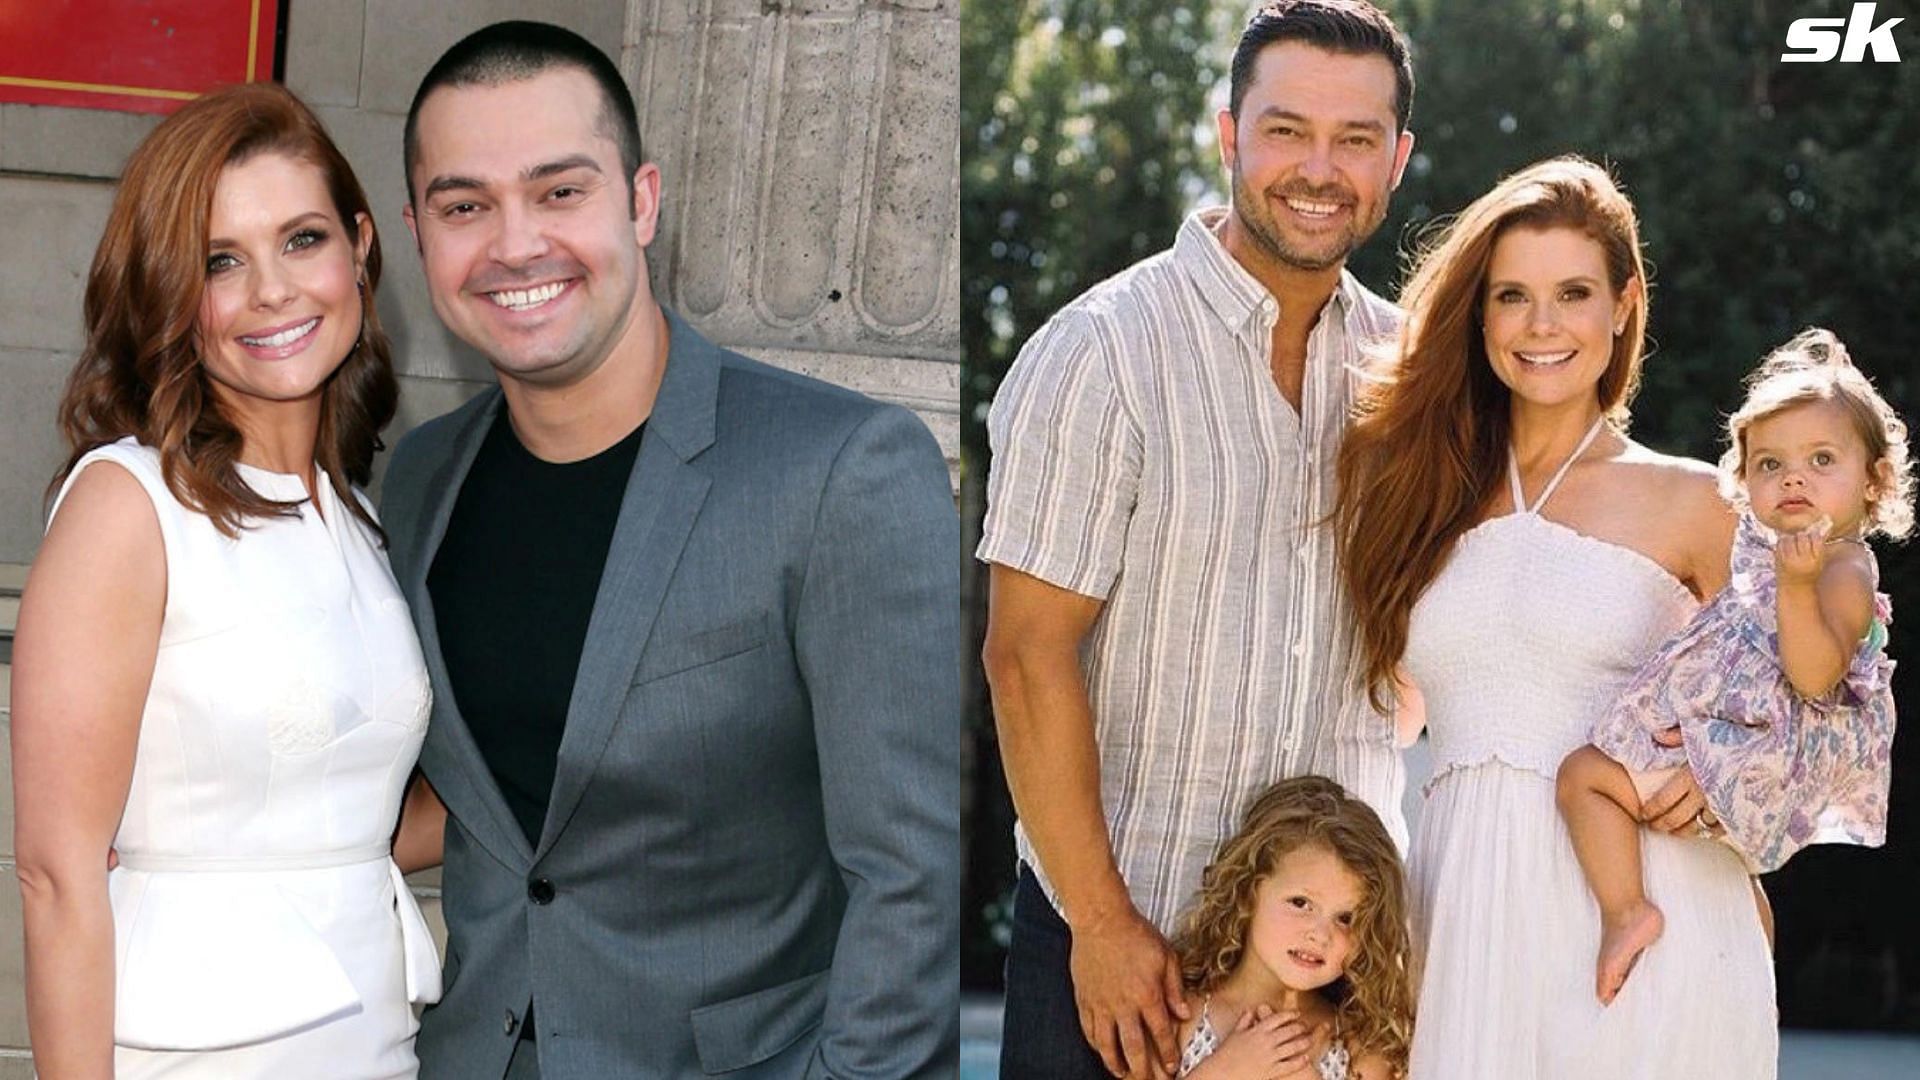 Nick Swisher: Hollywood actress JoAnna Garcia once revealed the moment she  knew ex-Yankees player Nick Swisher is the right man for her